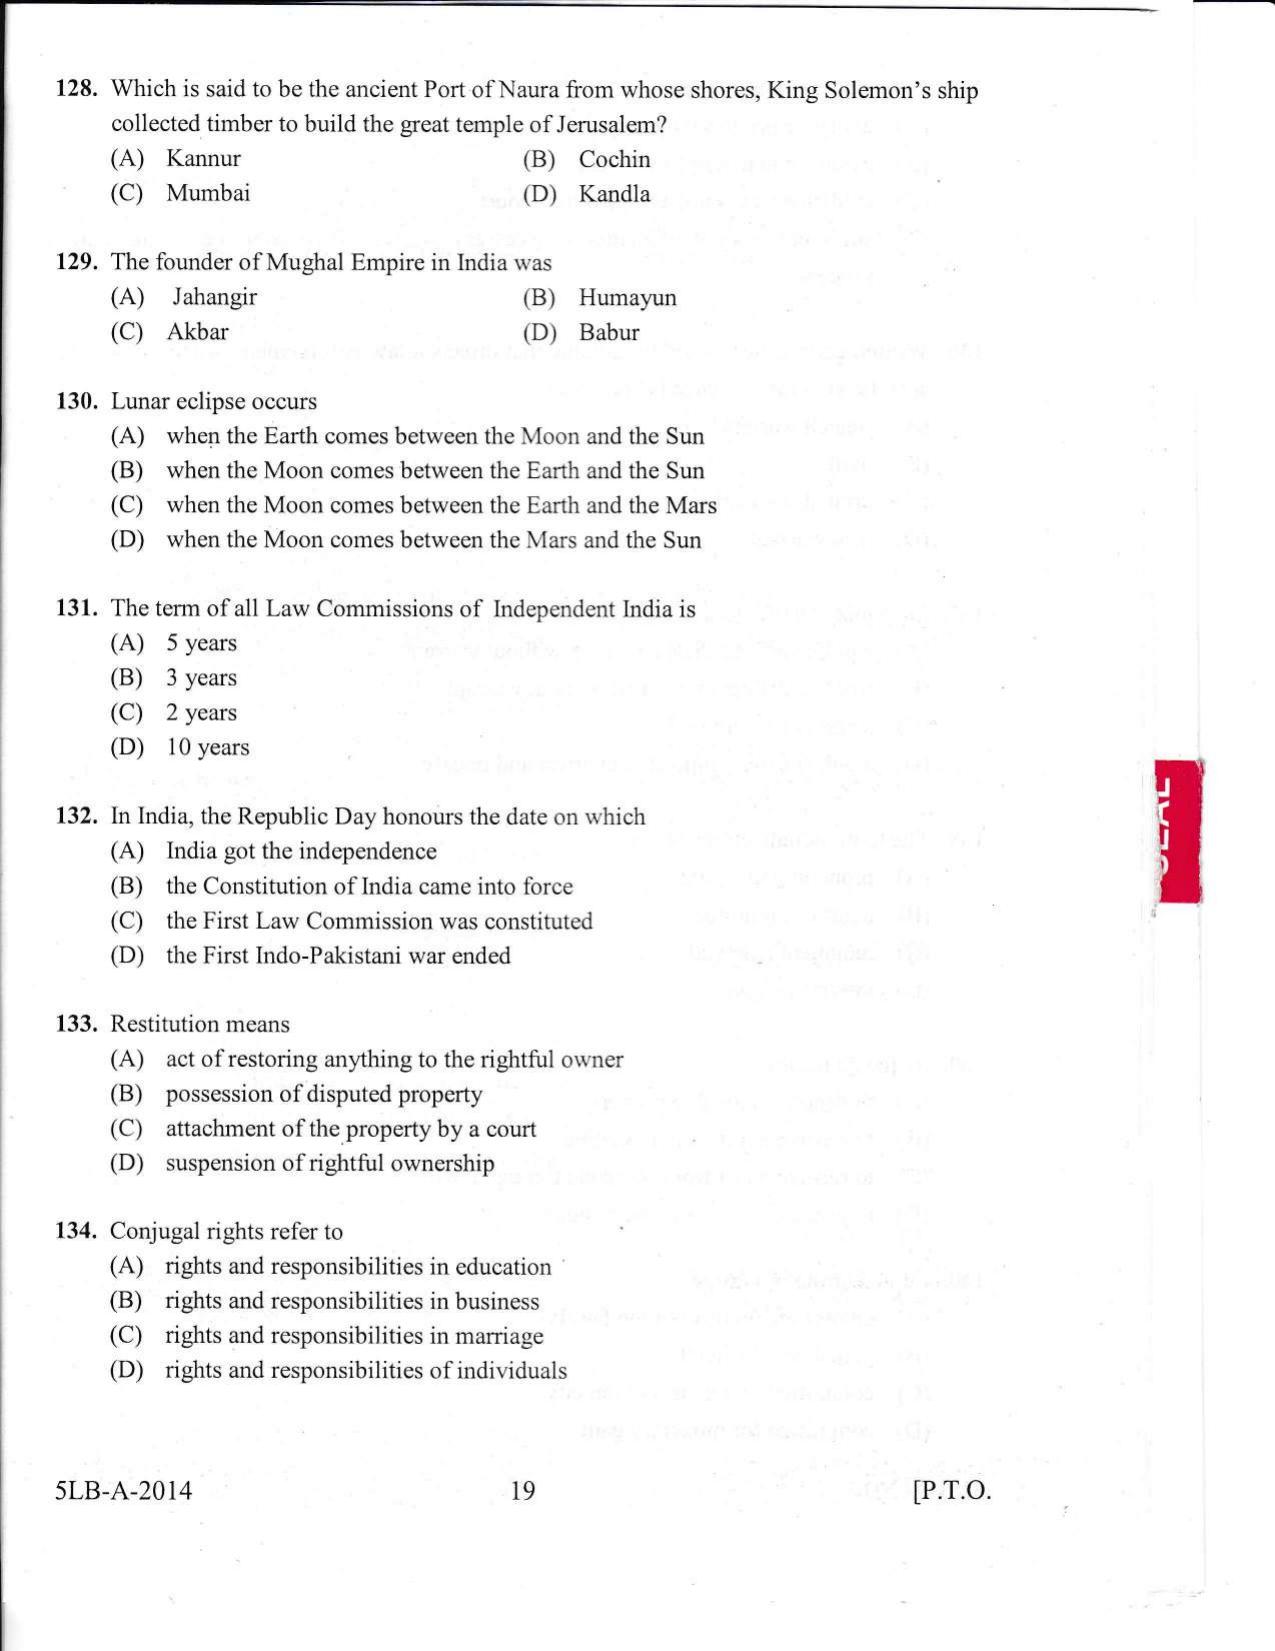 KLEE 5 Year LLB Exam 2014 Question Paper - Page 19